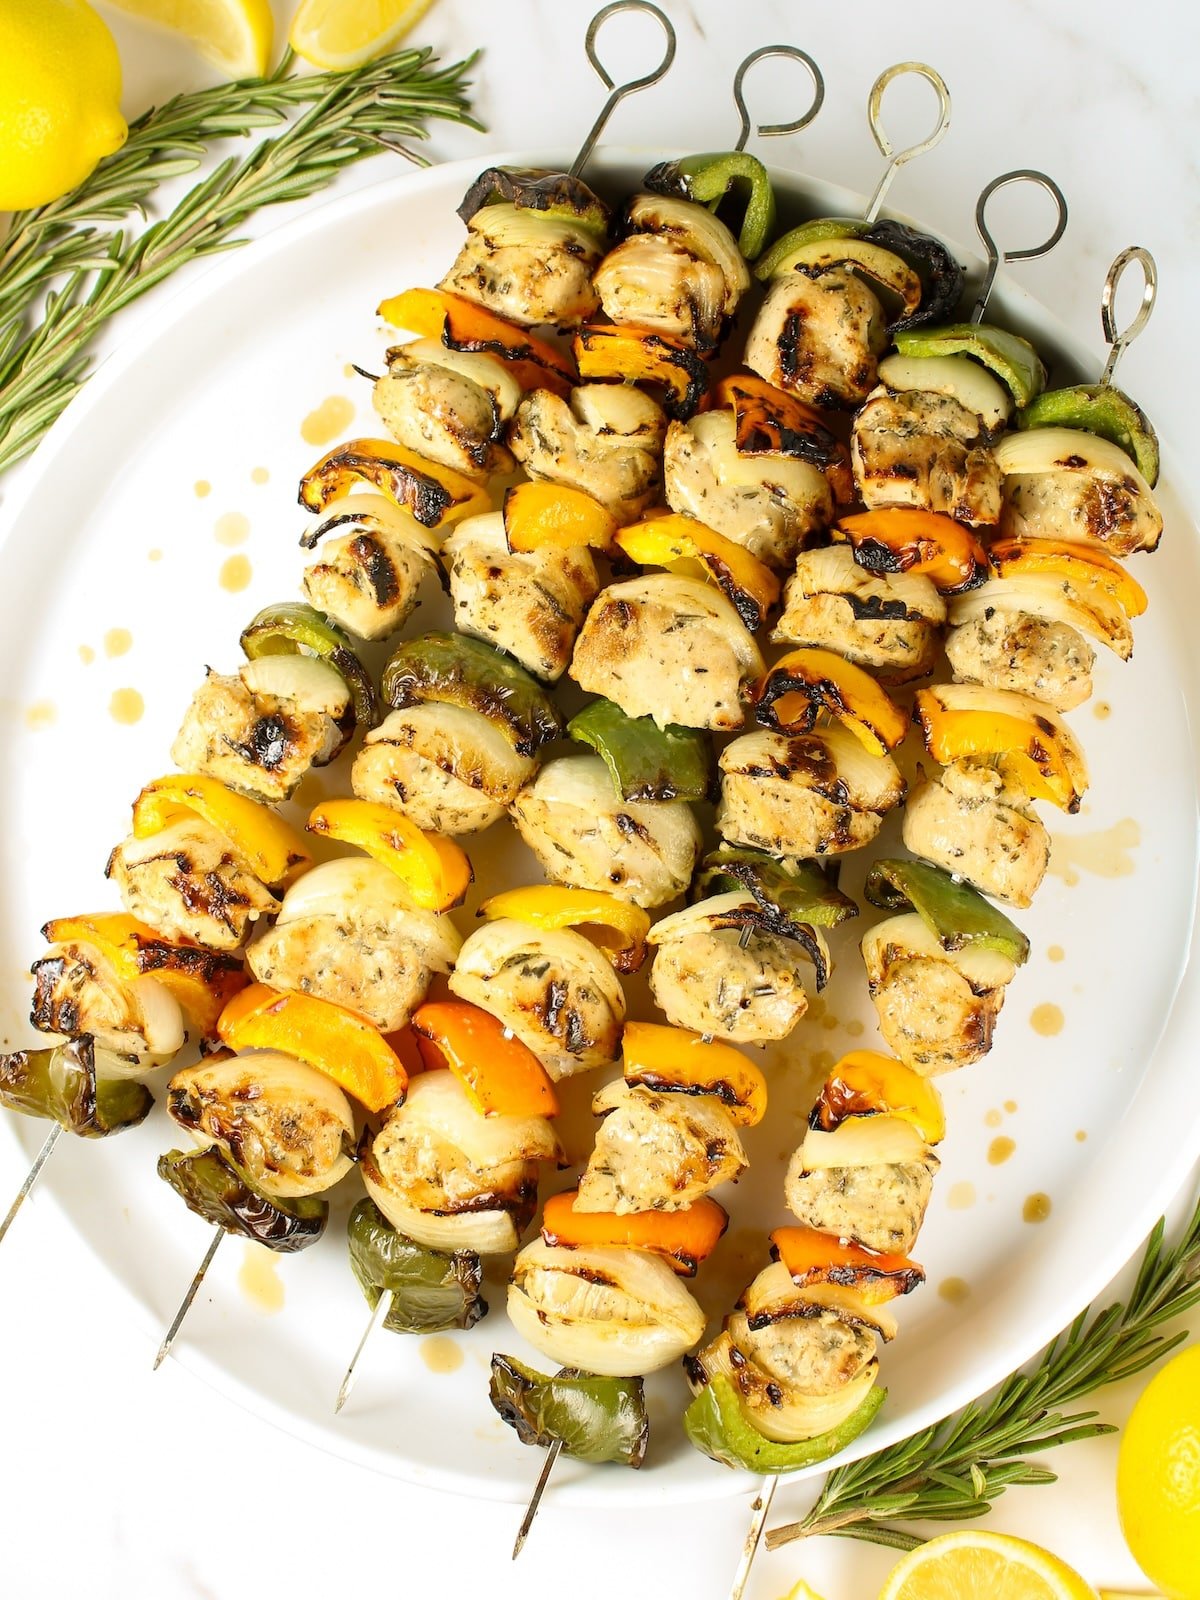 Skewers of Grilled Chicken Kabobs on a platter